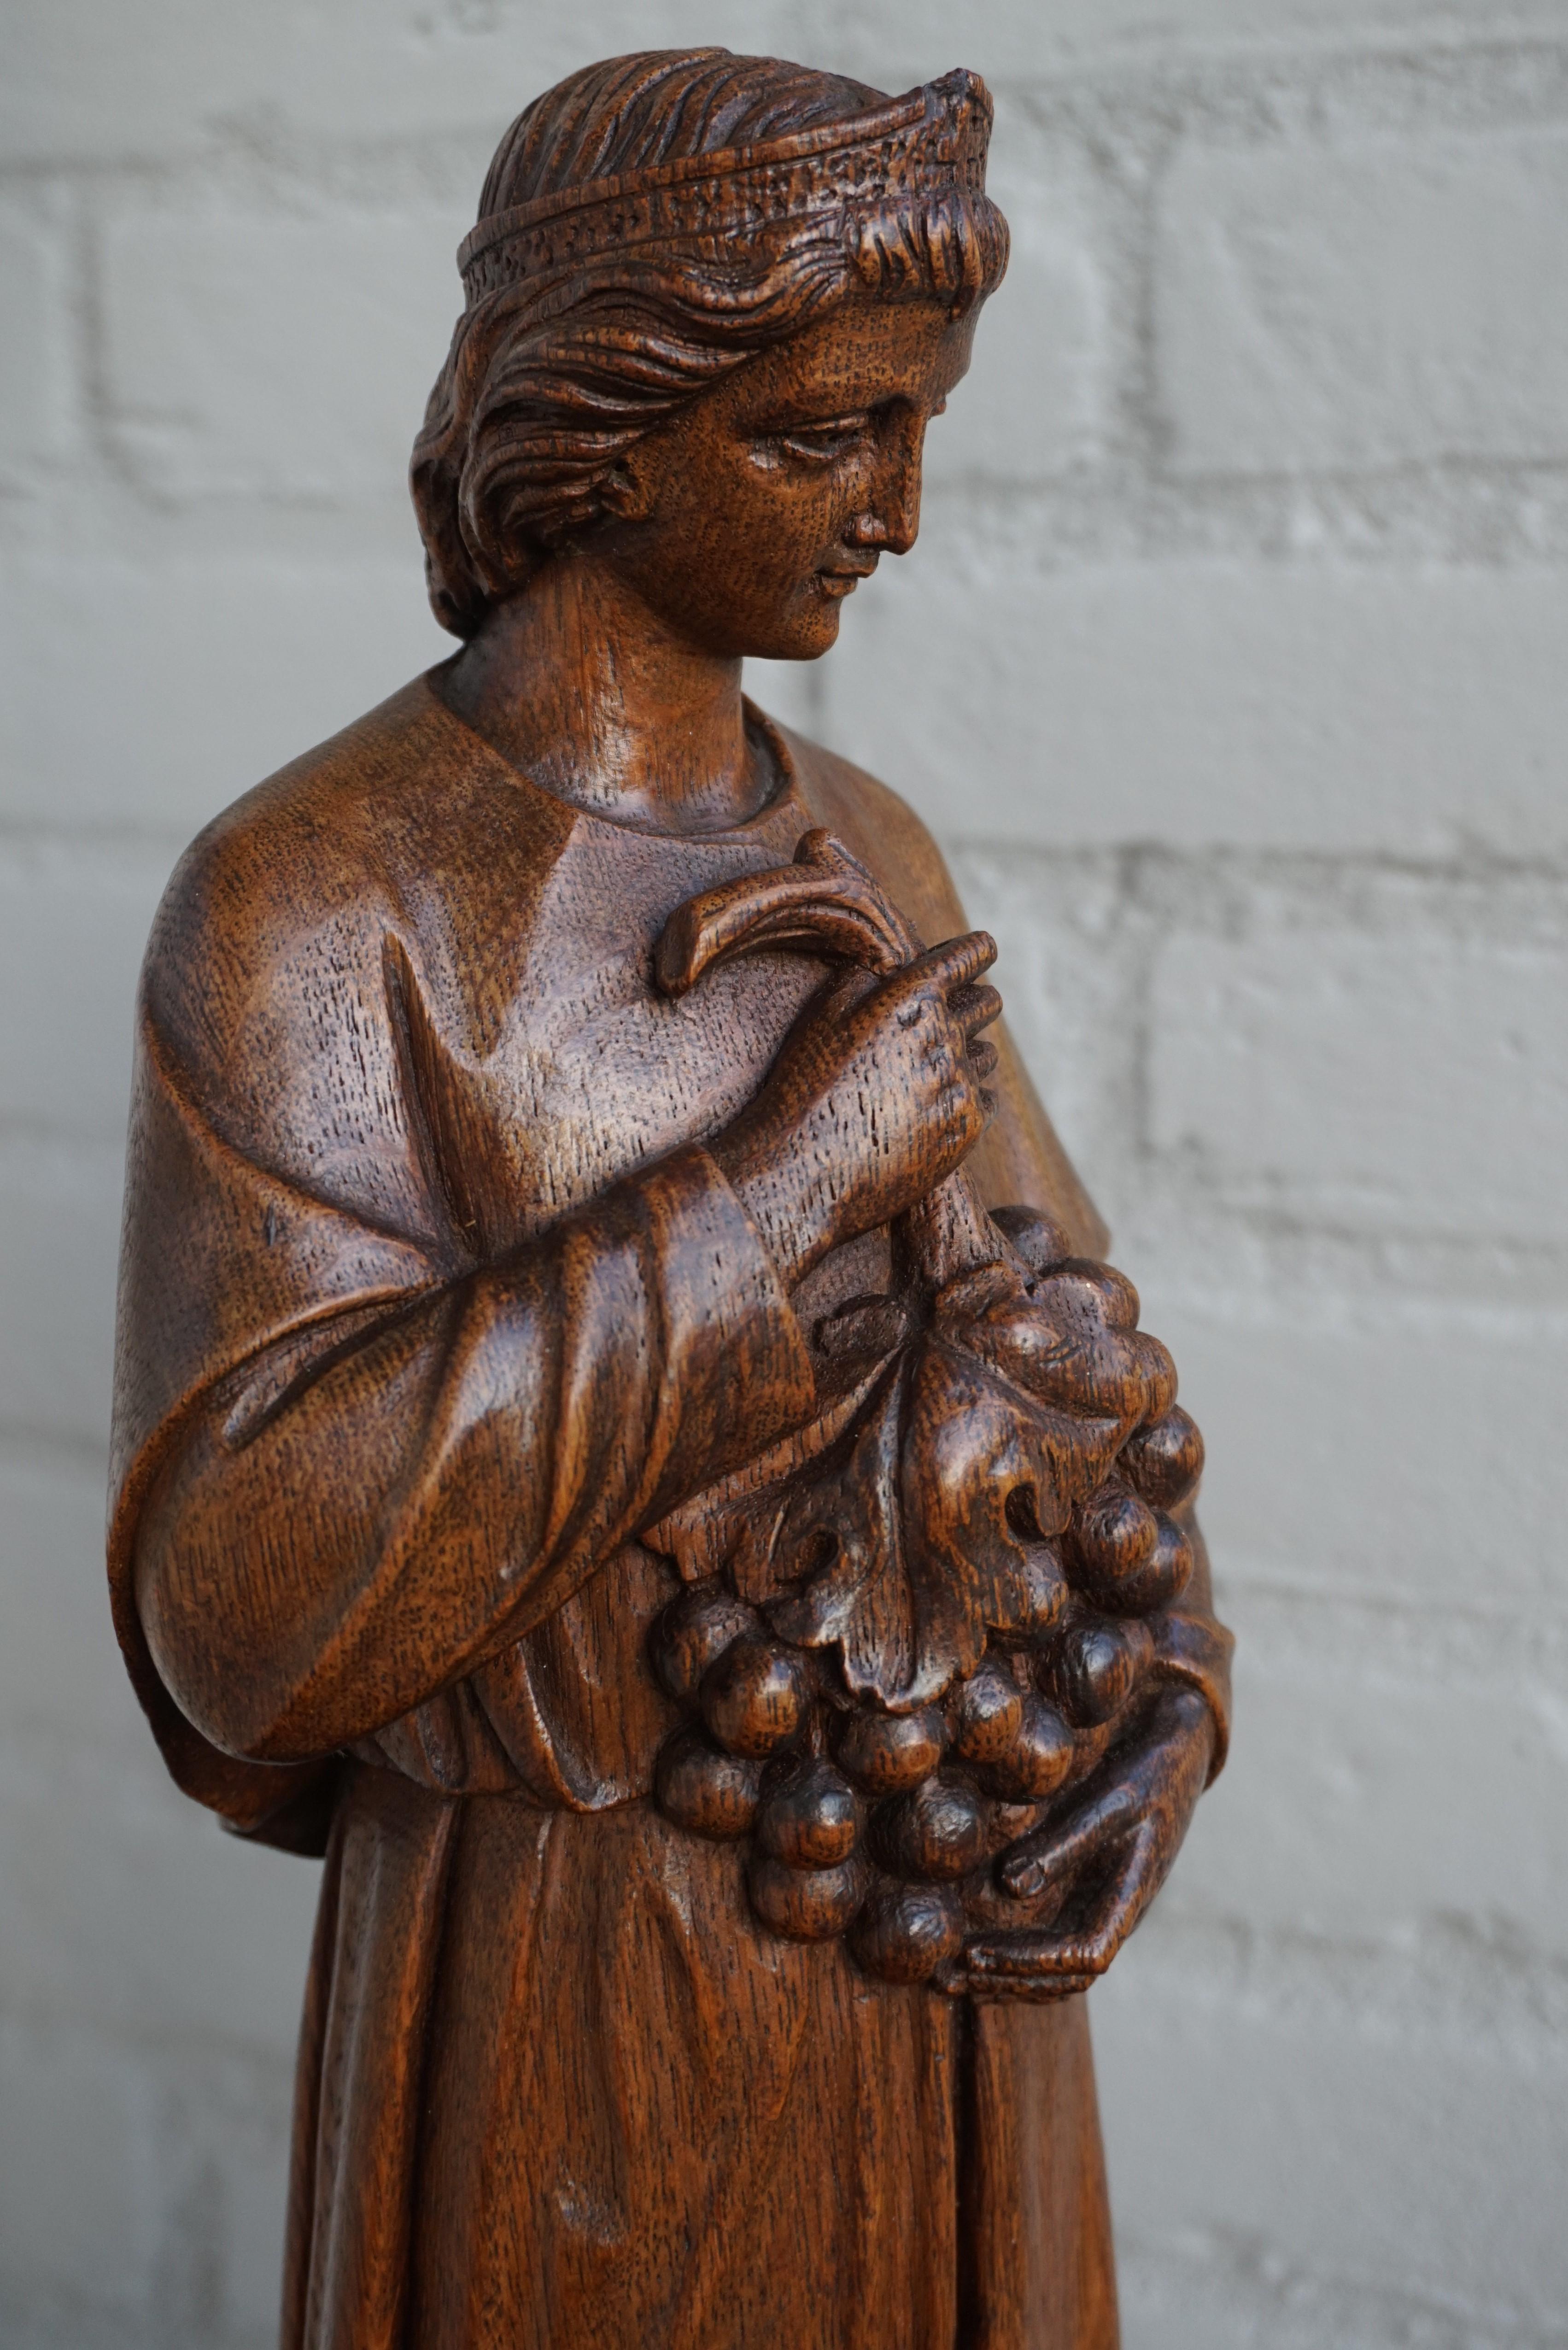 Wonderful church relic with a beautiful patina.

Over the years we have sold various hand carved wooden sculptures of saints, but we have never seen this particular saint holding a large grape bunch. Unfortunately we don't know who he or she is.